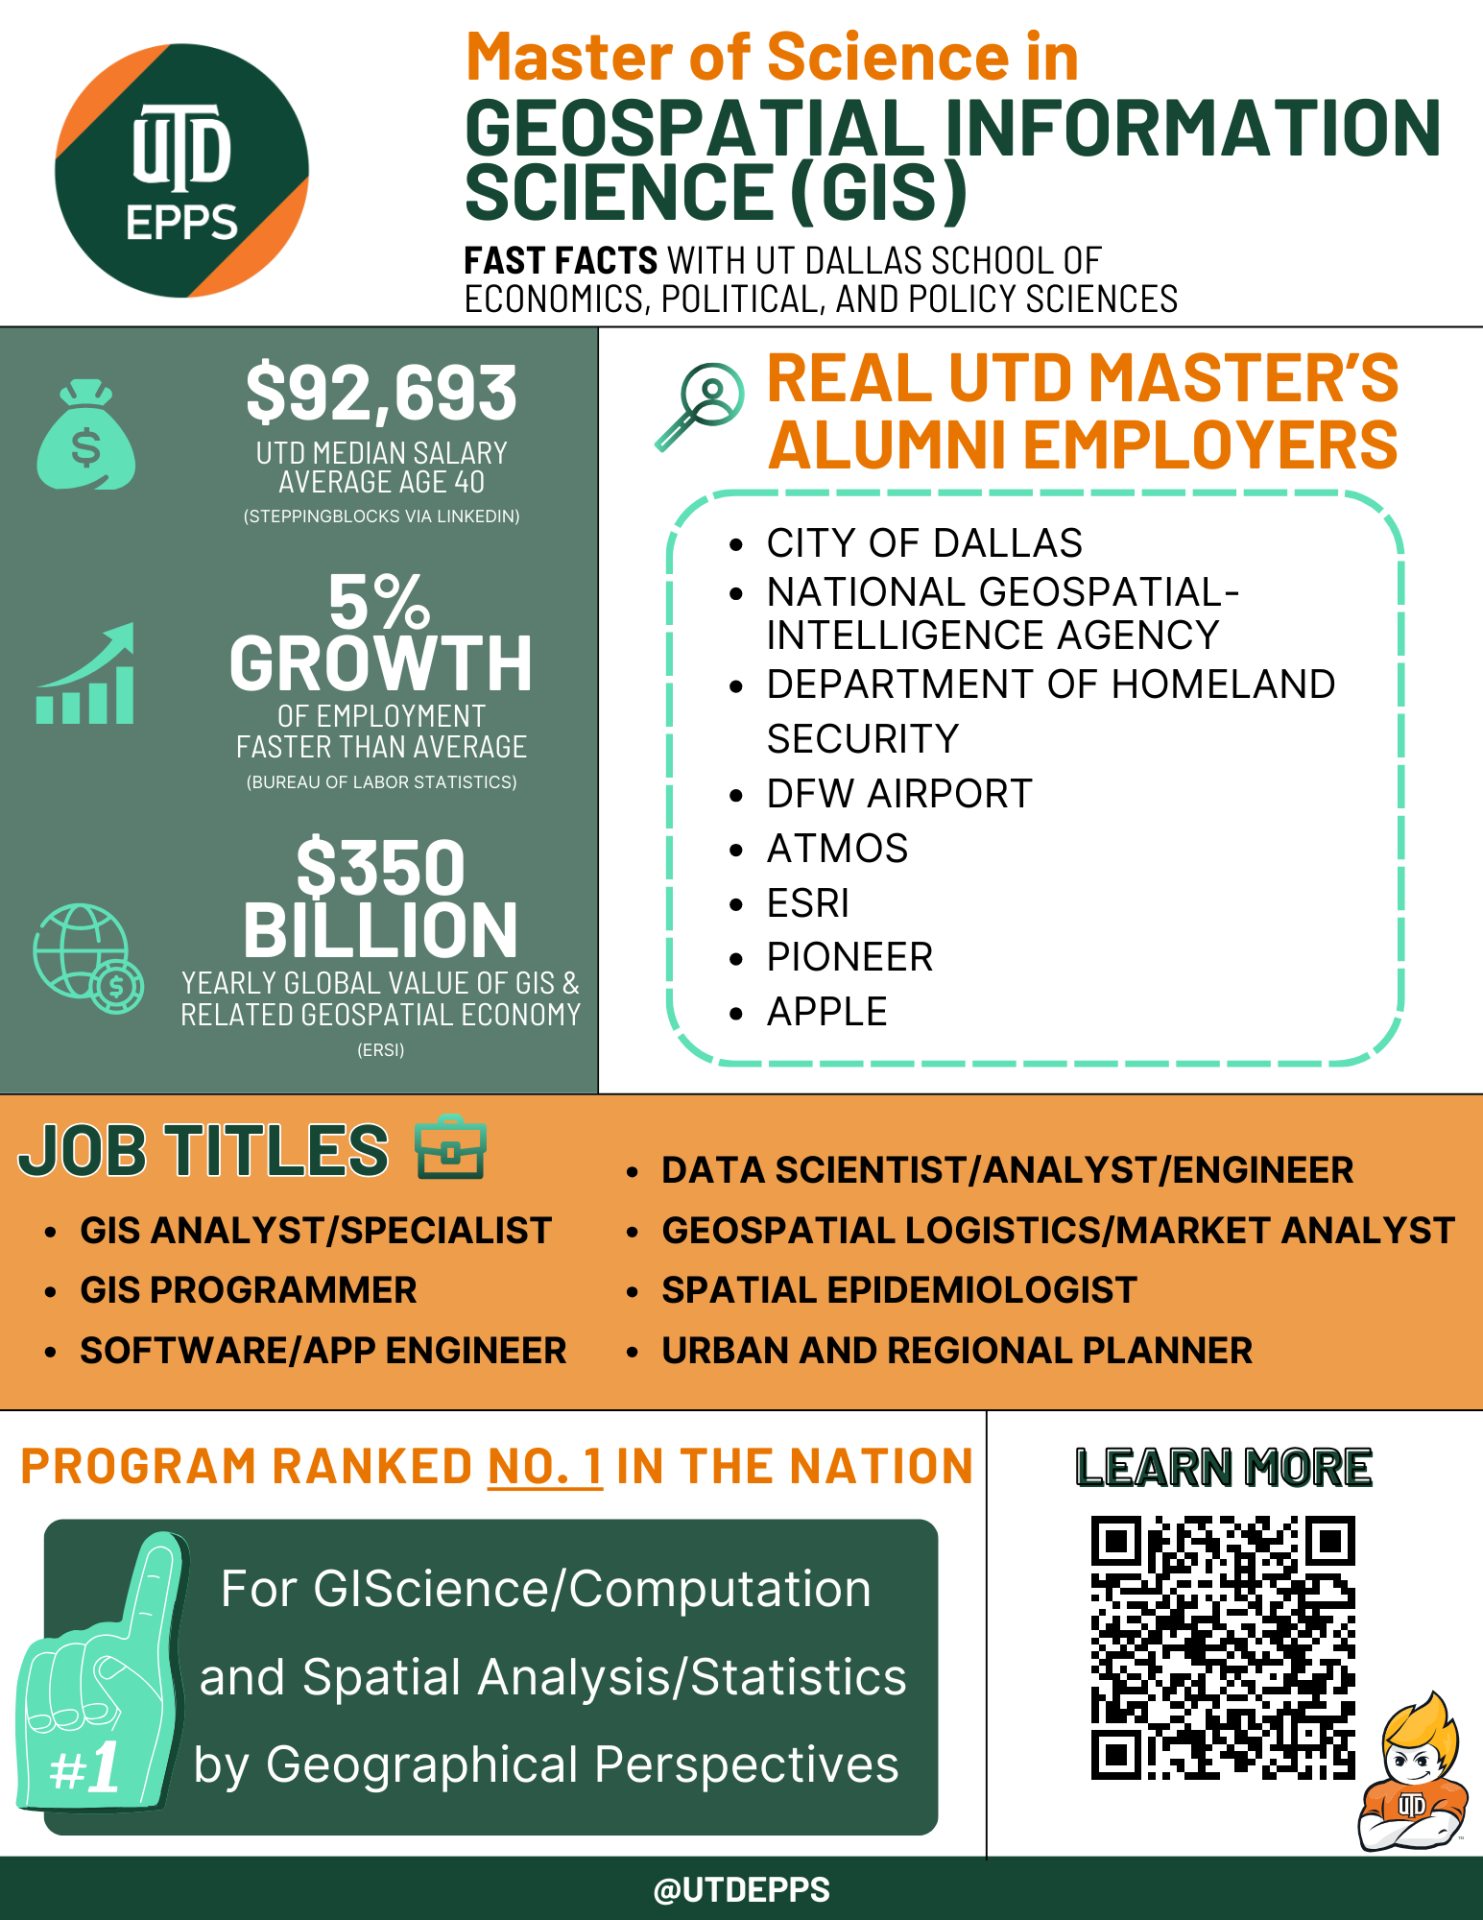 Master of Science in
GEOSPATIAL INFORMATION SCIENCE (GIS). Fast Facts with Ut Dallas school of economics, political, and policy sciences.

,693 is the UTD Median Salary
(Average age 40). Data is from Steppingblocks via LINKEDIN. 5% Growth OF EMPLOYMENT which is FASTER THAN AVERAGE. Data is from Bureau of Labor Statistics. 
0 BILLION YEARLY GLOBAL VALUE OF GIS & RELATED GEOSPATIAL ECONOMY. Data is from ERSI. 

REAL UTD MASTER’S ALUMNI EMPLOYERS include:
City of Dallas
National Geospatial-Intelligence Agency
Department of Homeland Security
DFW Airport
Atmos
Esri
Pioneer
Apple


Job titles include: 
GIS Analyst/Specialist
GIS Programmer
Software/App Engineer
Data Scientist/Analyst/Engineer
Geospatial Logistics/Market Analyst
Spatial Epidemiologist
Urban and Regional Planner

Program ranked No. 1 in the nation for GIScience/Computation and Spatial Analysis/Statistics by Geographical Perspectives. Data is from BUREAU OF LABOR STATISTICS.

LEARN MORE by scanning the QR code. 

@UTDEPPS